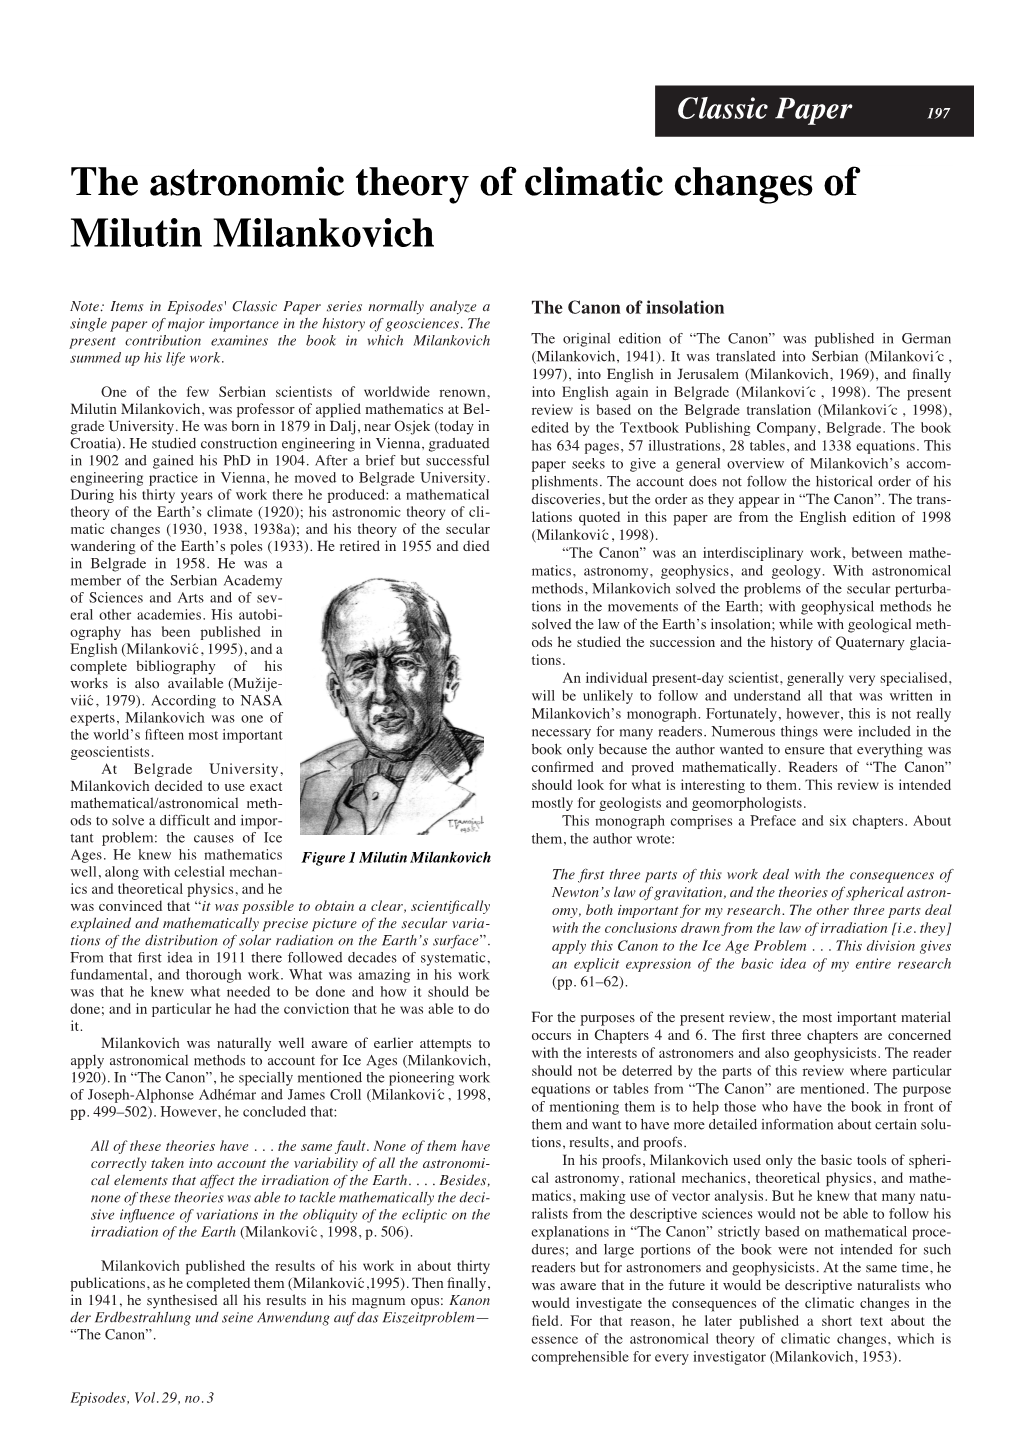 The Astronomic Theory of Climatic Changes of Milutin Milankovich